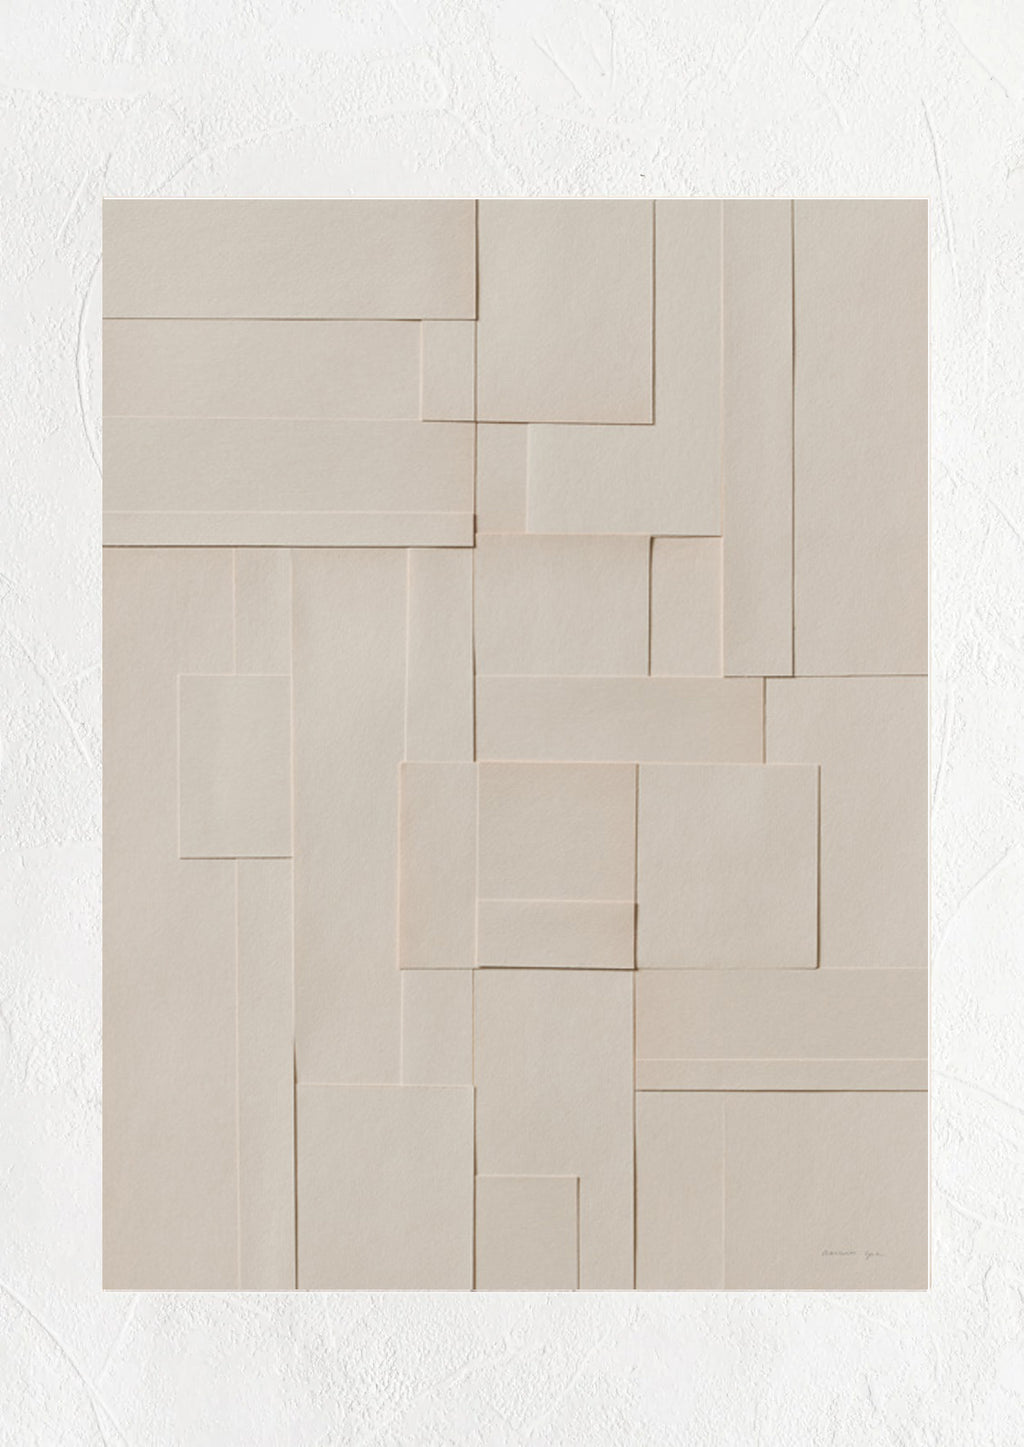 1: An art print featuring a photograph of layered neutral pieces of paper cut in squares and rectangles.